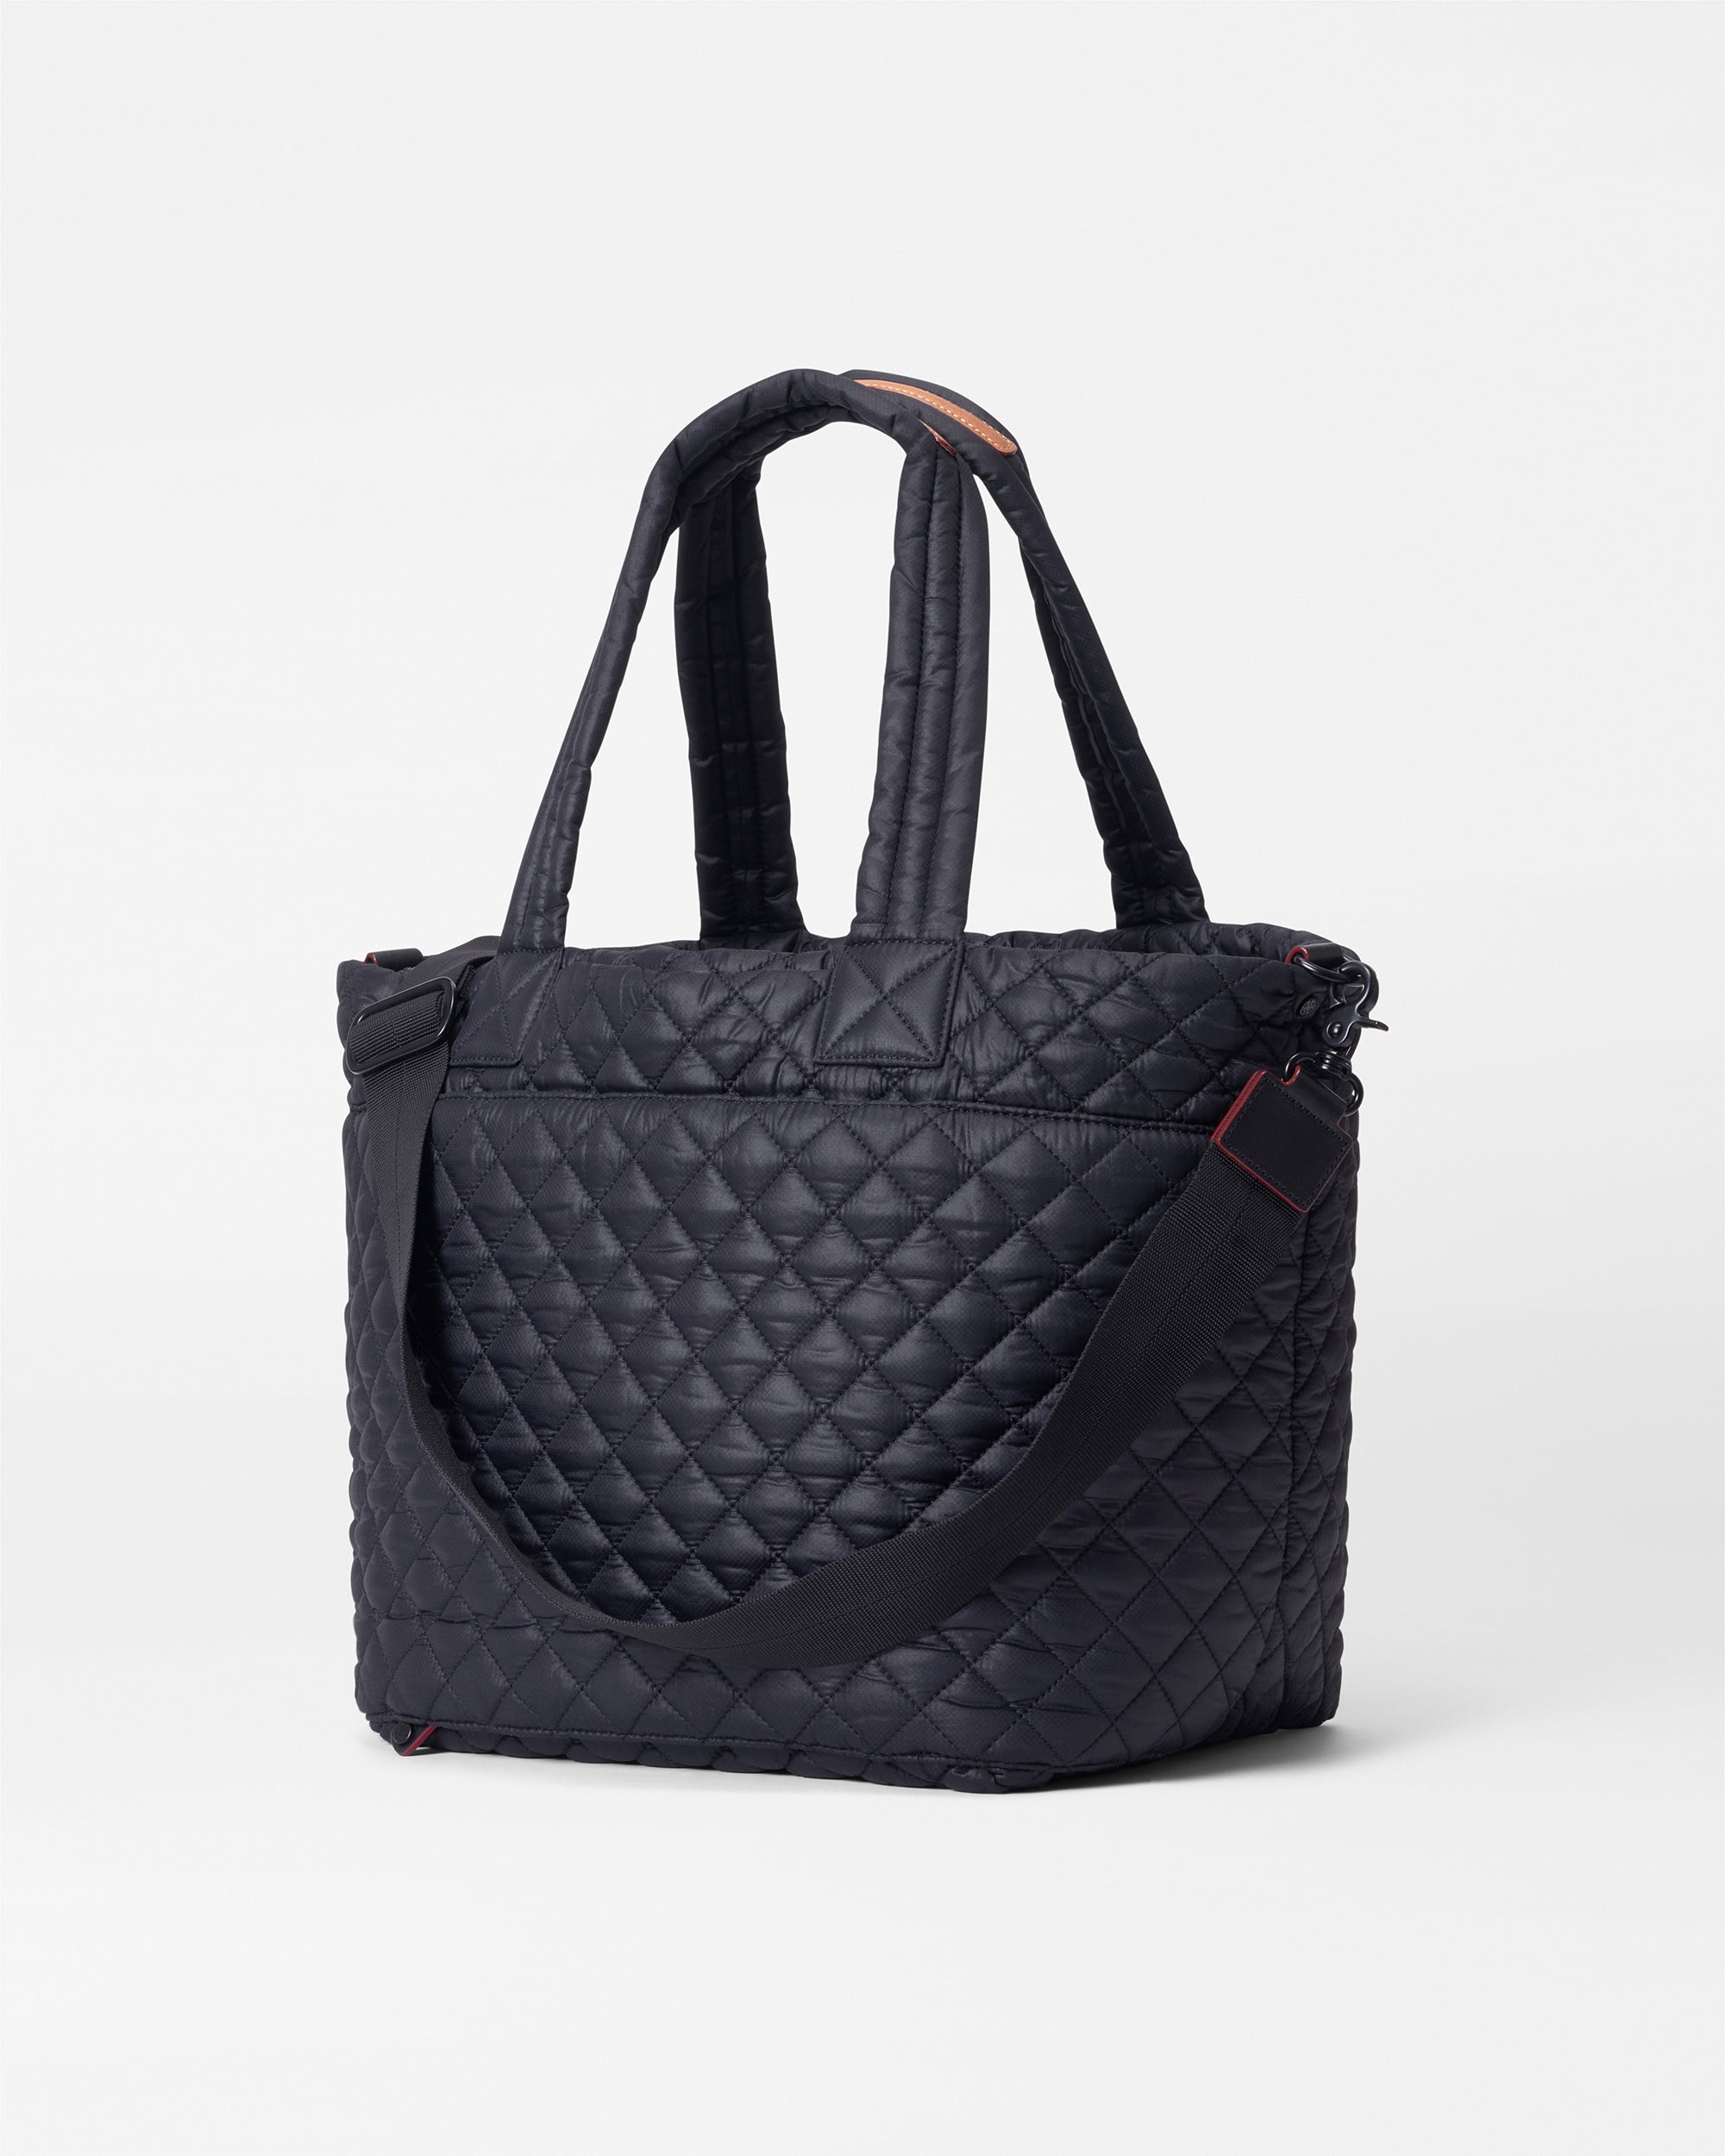 MZ WALLACE MEDIUM METRO TOTE DELUXE IN DENIM REC – A Step Above Shoes